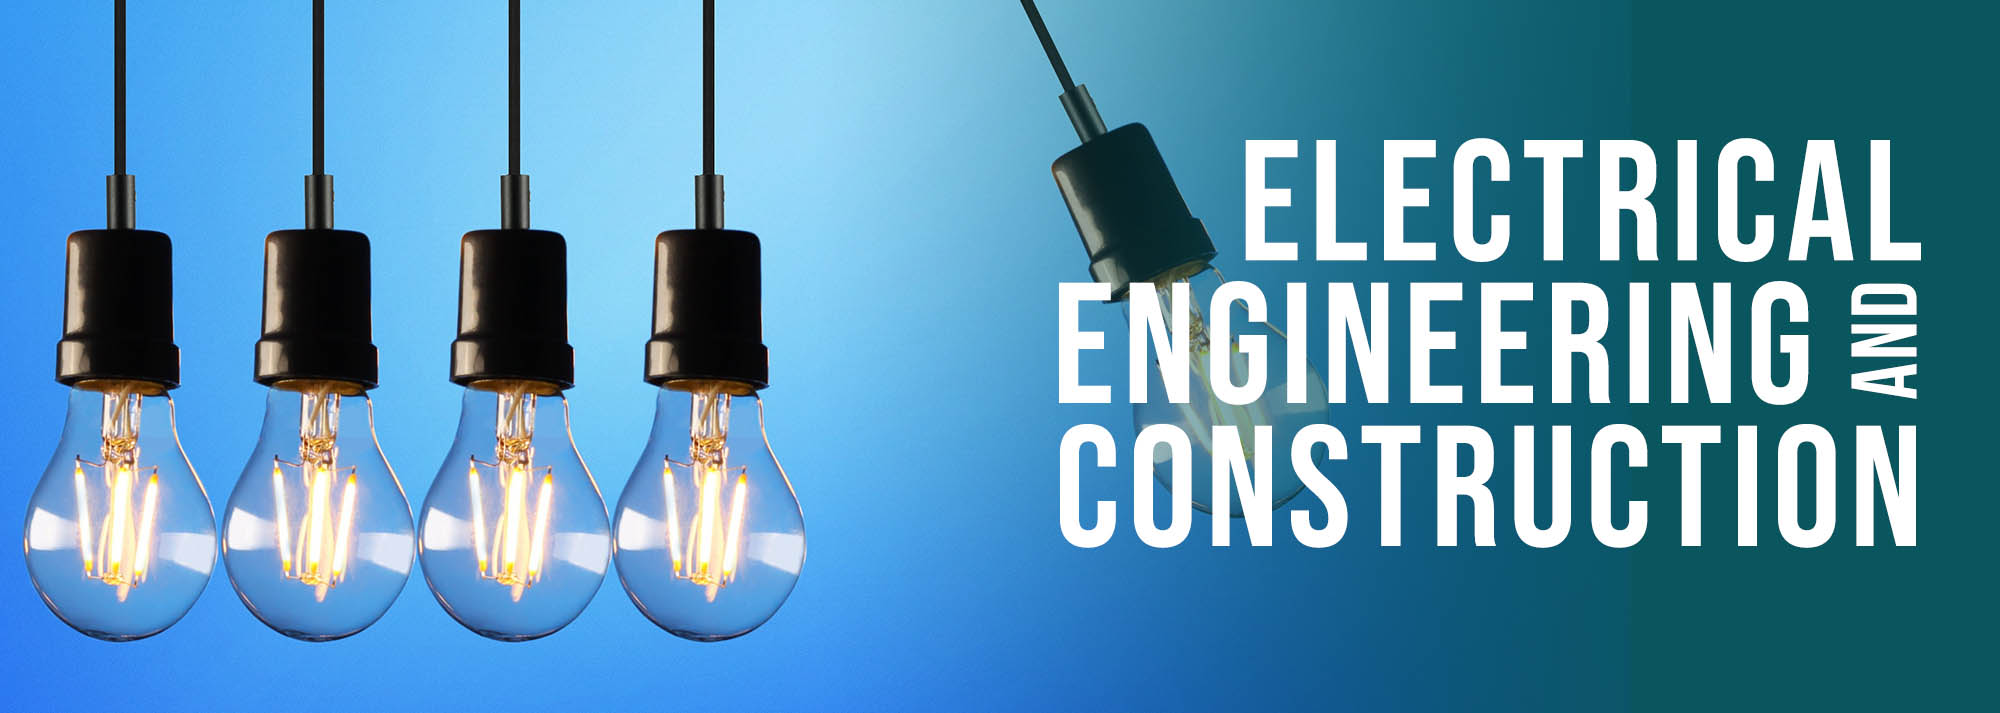 Jenec - Electrical Engineering and Construction